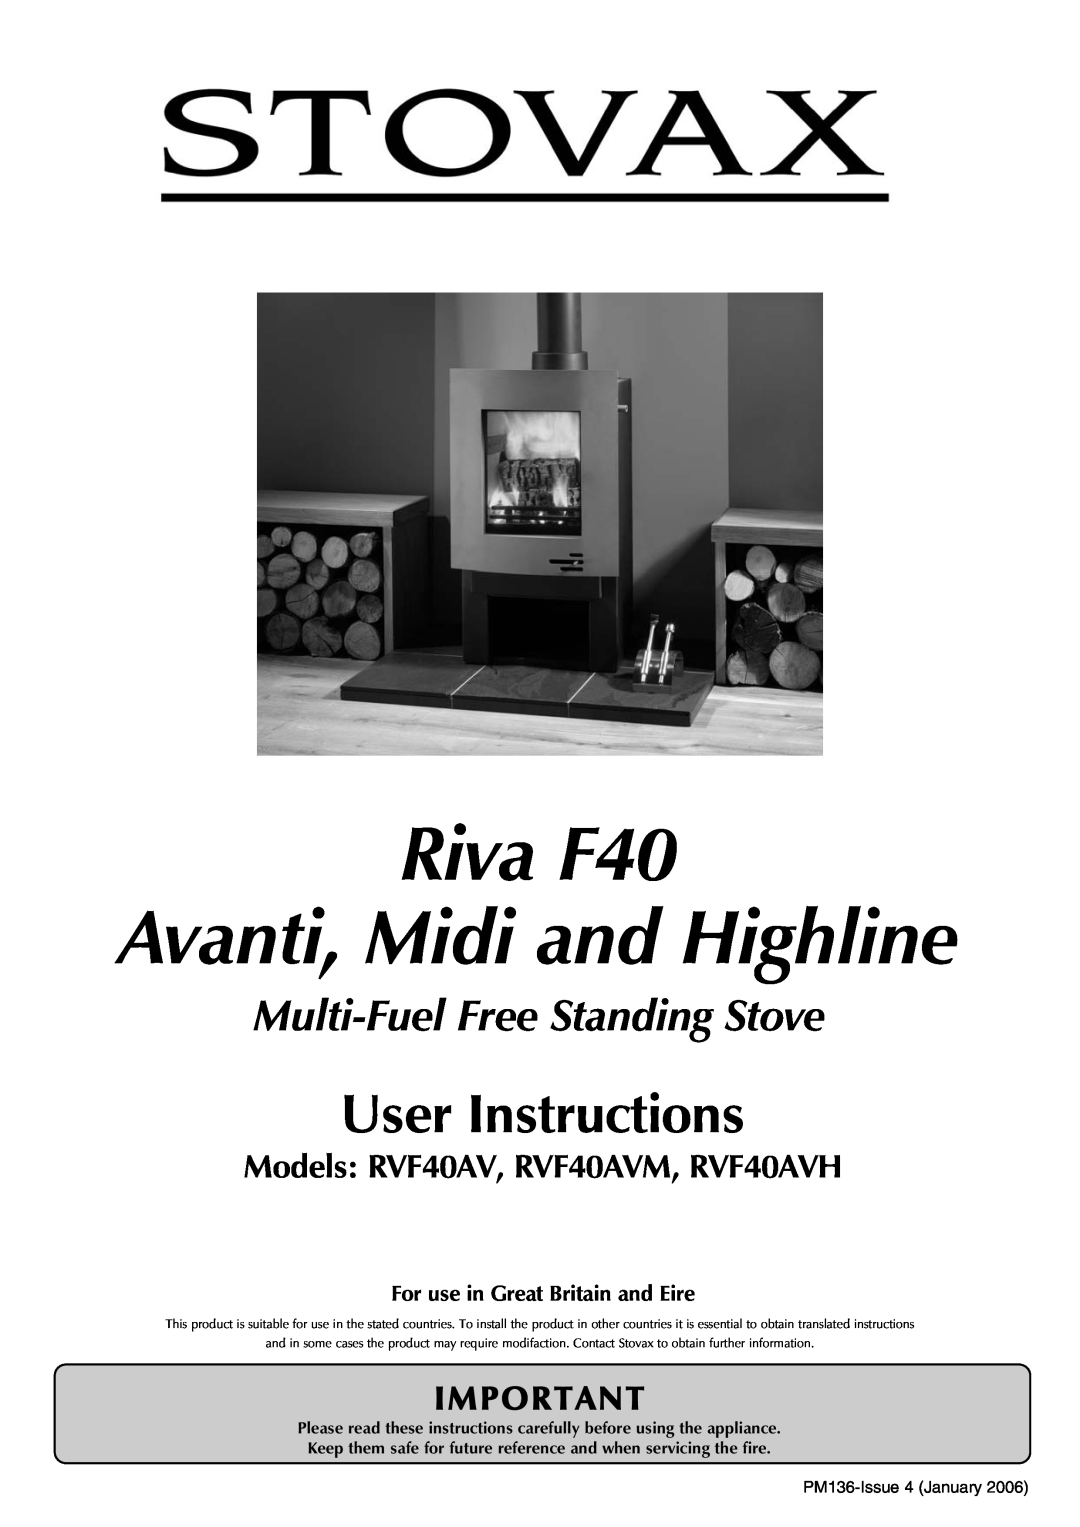 Stovax RVF40AVM, RVF40AVH manual For use in Great Britain and Eire, Riva F40 Avanti, Midi and Highline, User Instructions 